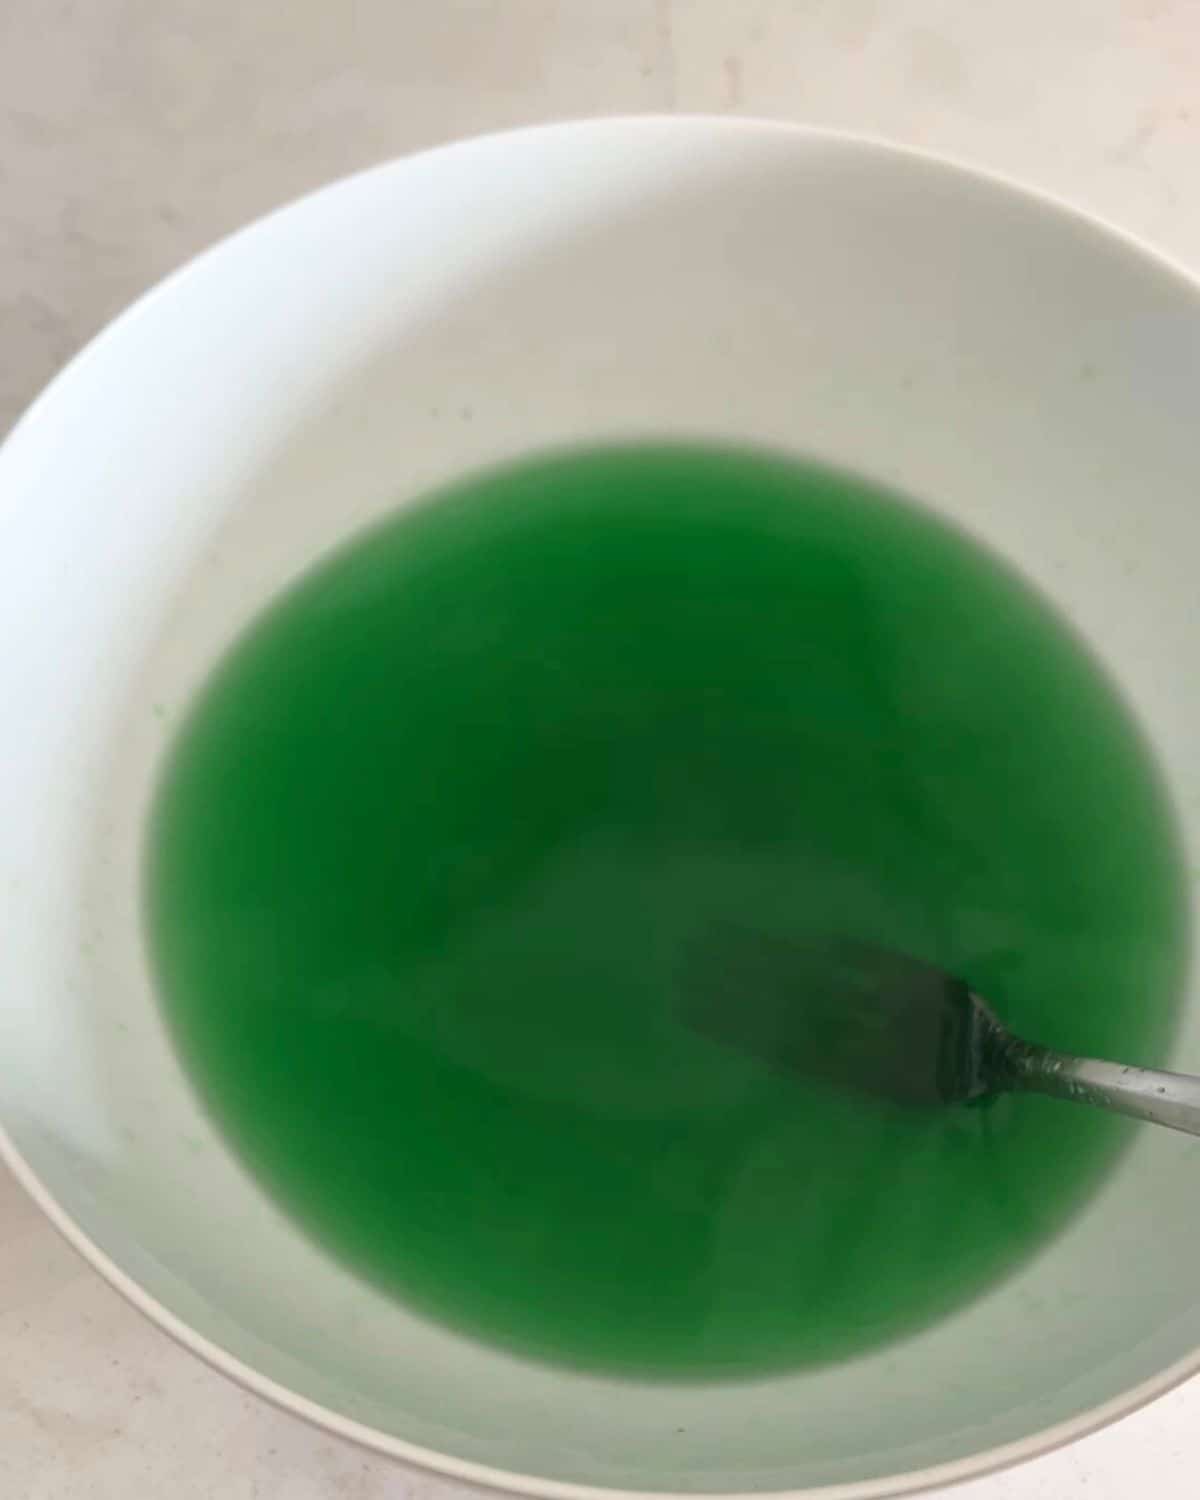 Key lime jello dissolved in water. 